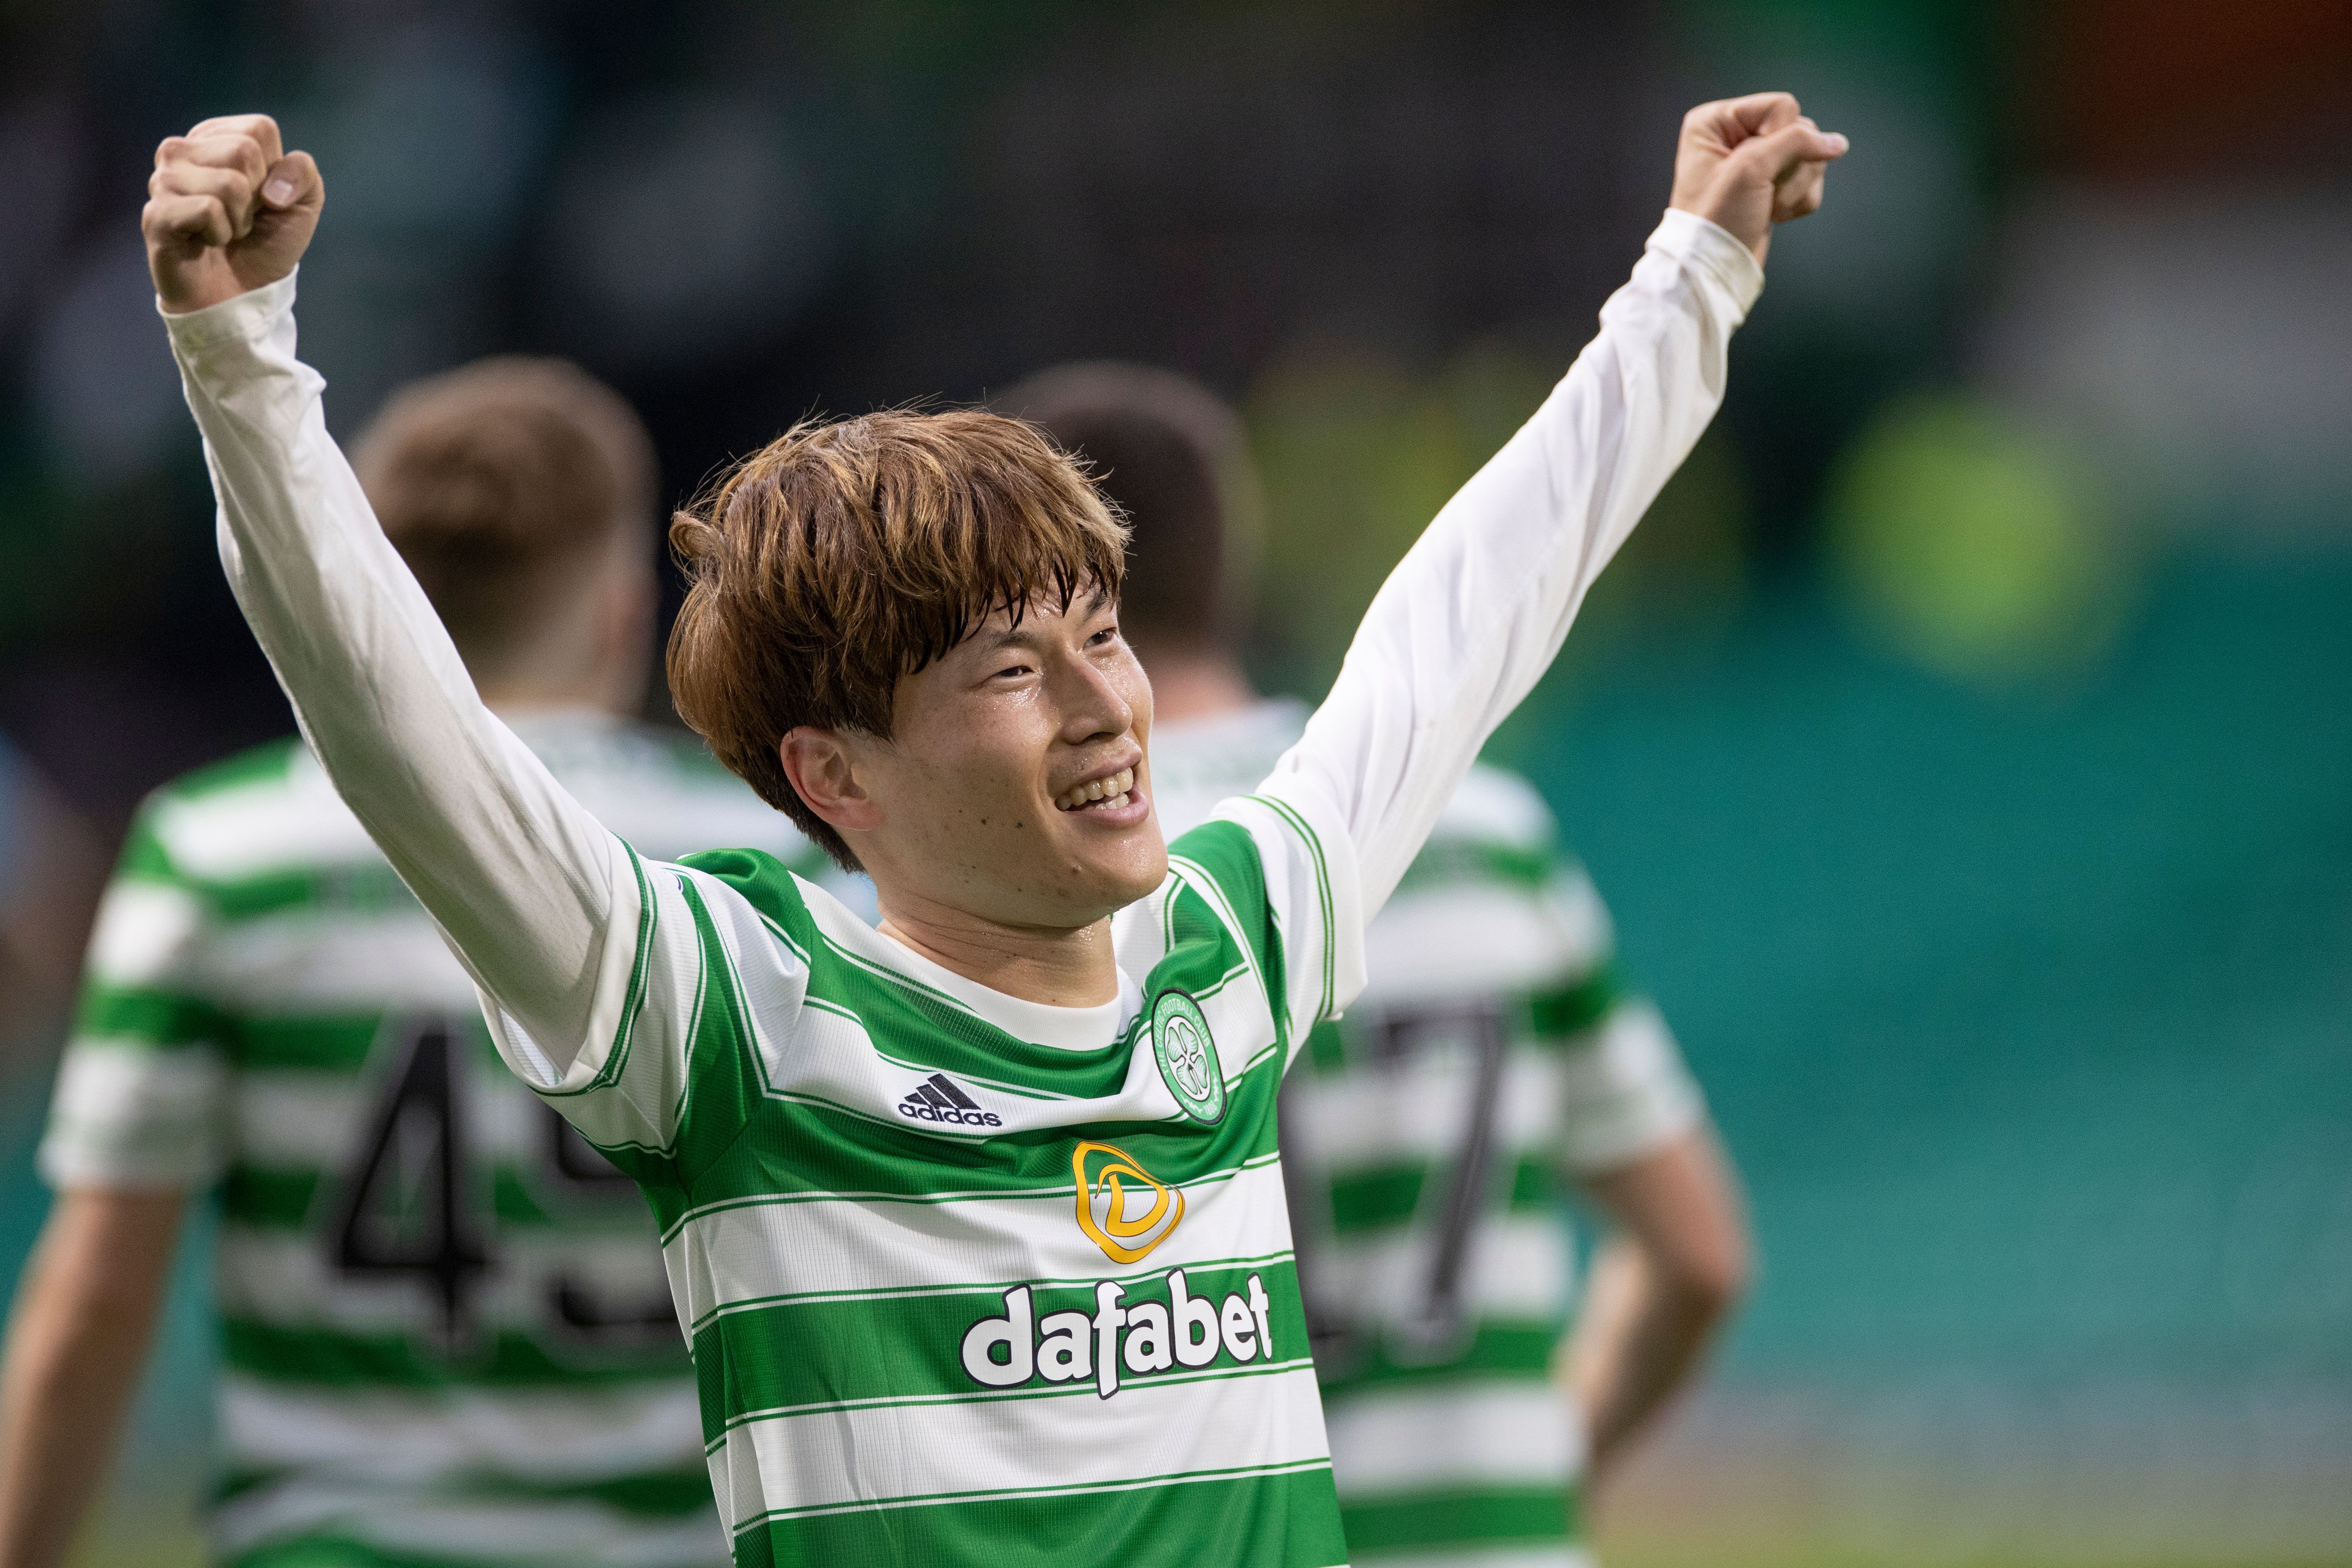 Kyogo Furuhashi of Celtic celebrates his third goal (Hat trick goal) during the Cinch Scottish Premiership match between Celtic FC and Dundee FC on August 8, 2021 in Glasgow, United Kingdom